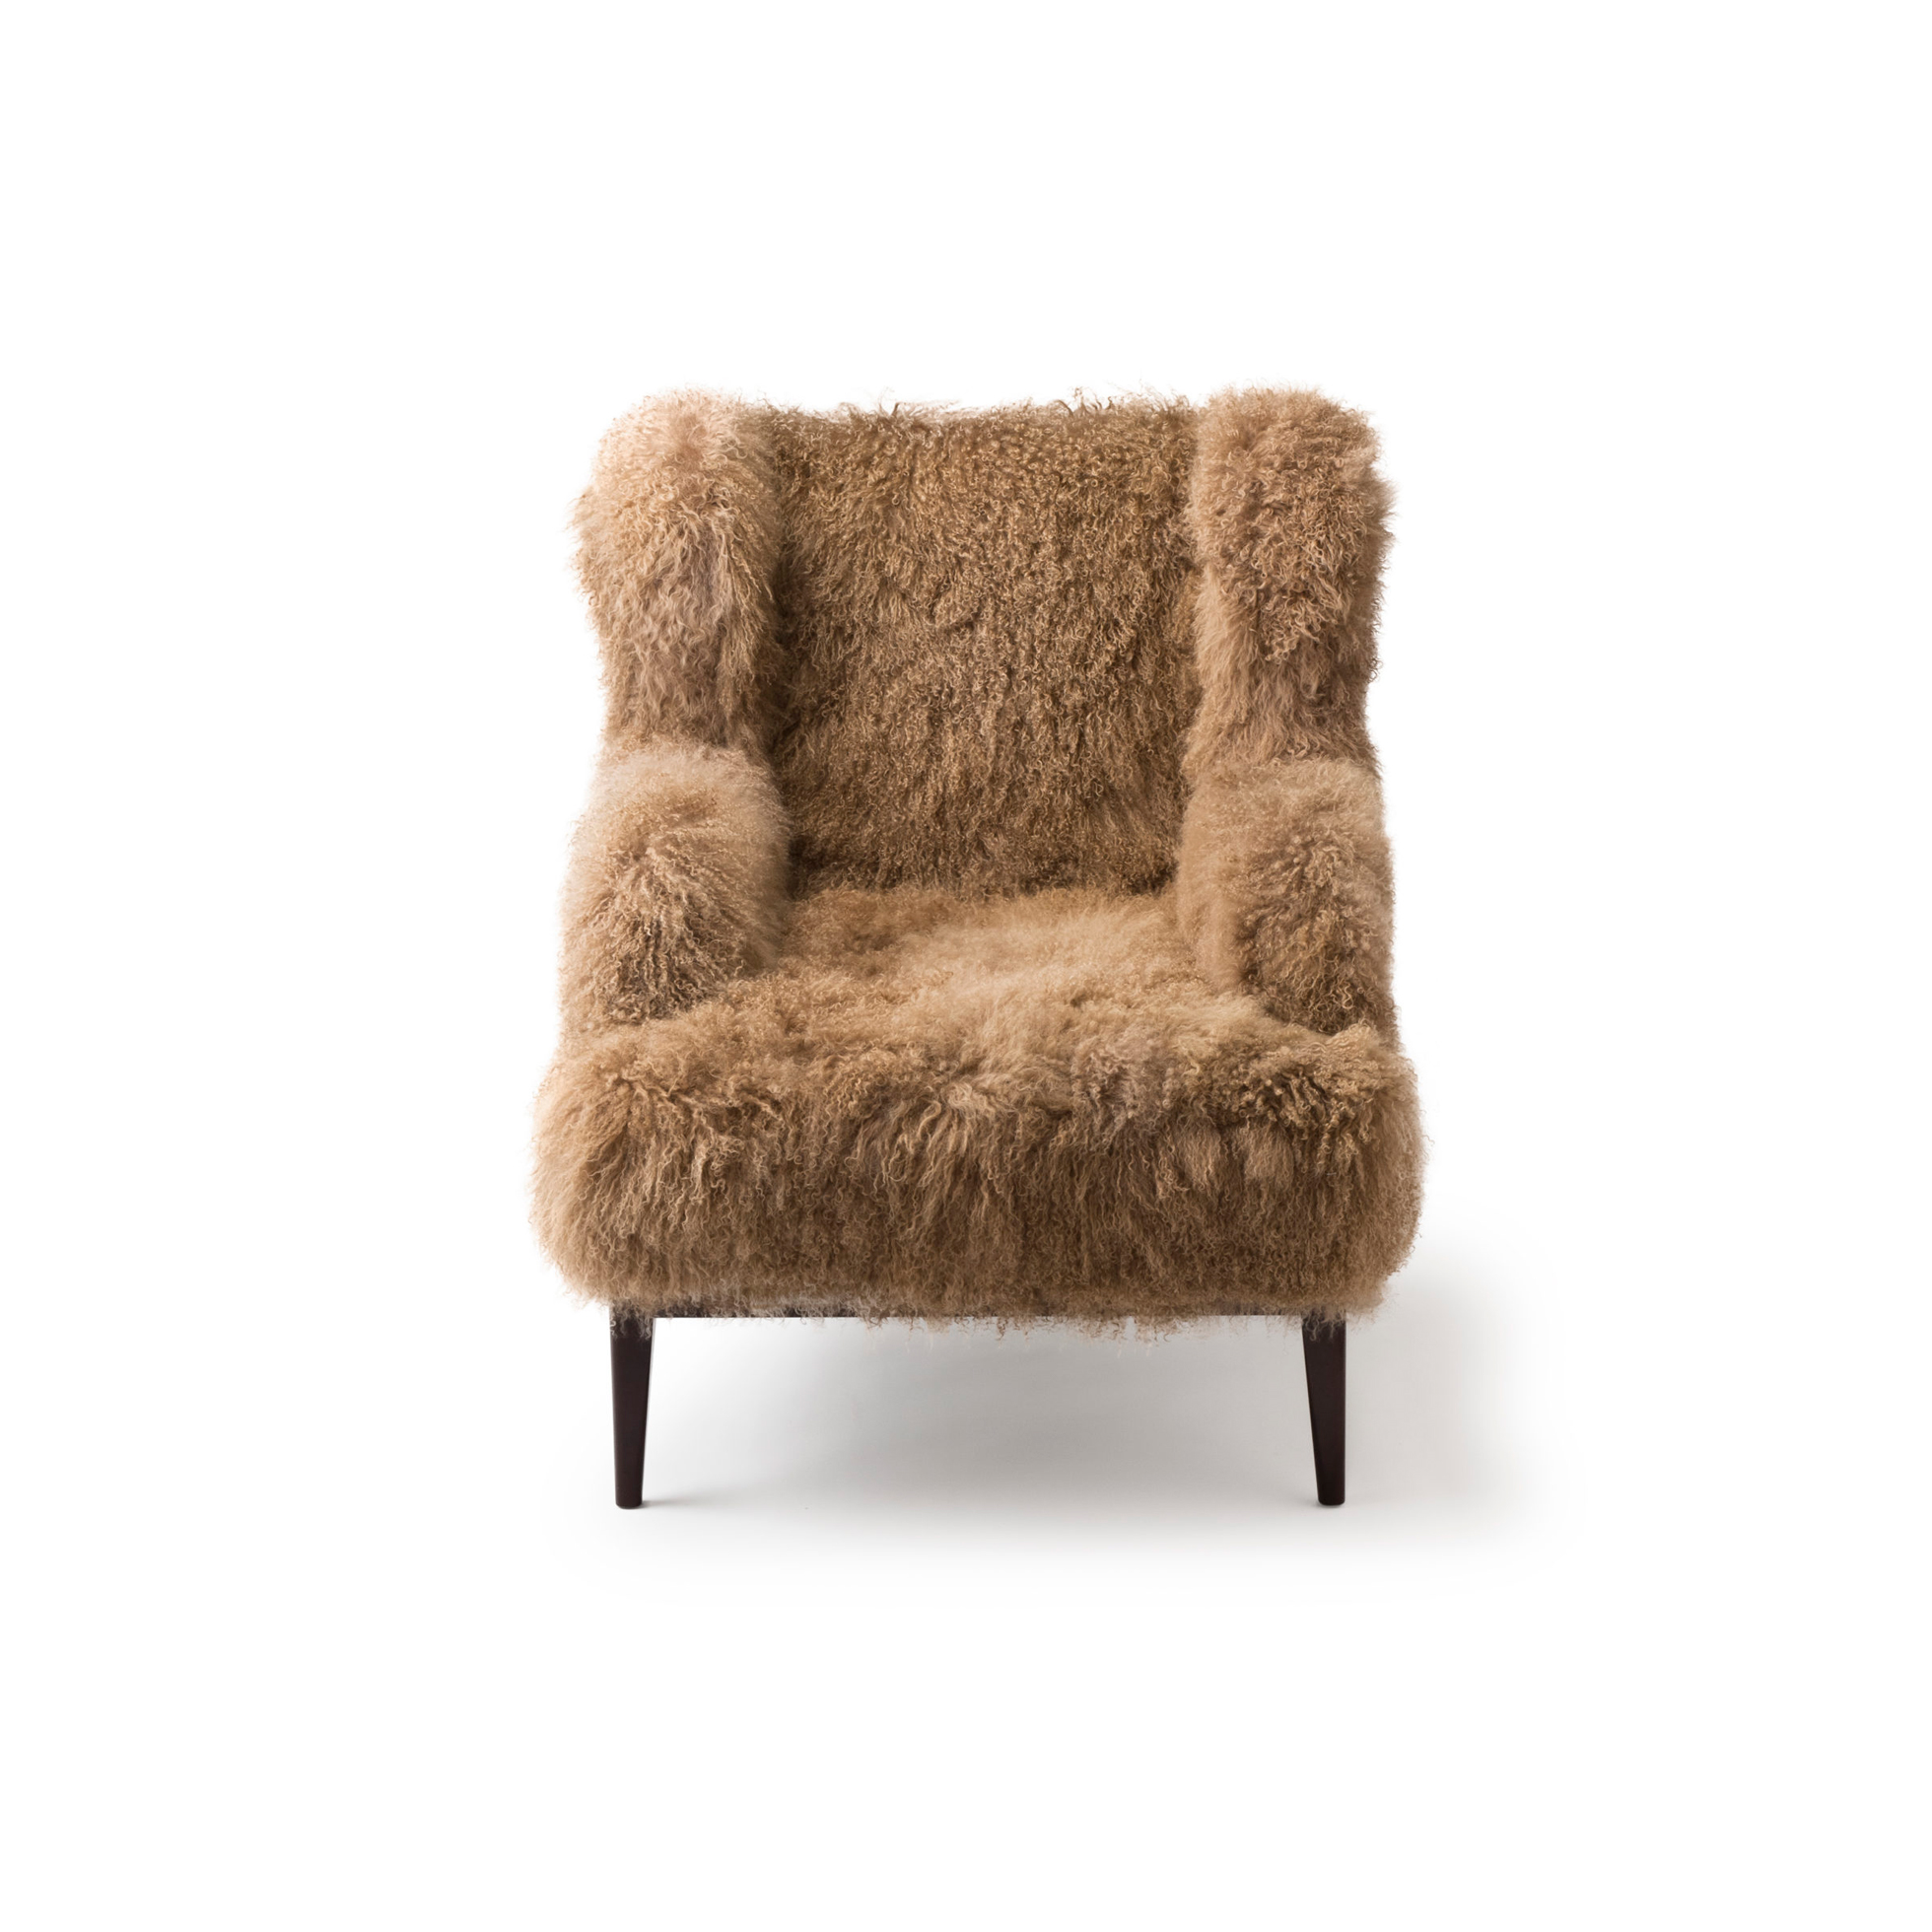 mammoth wing  mammoth wing chair Amy Somerville 